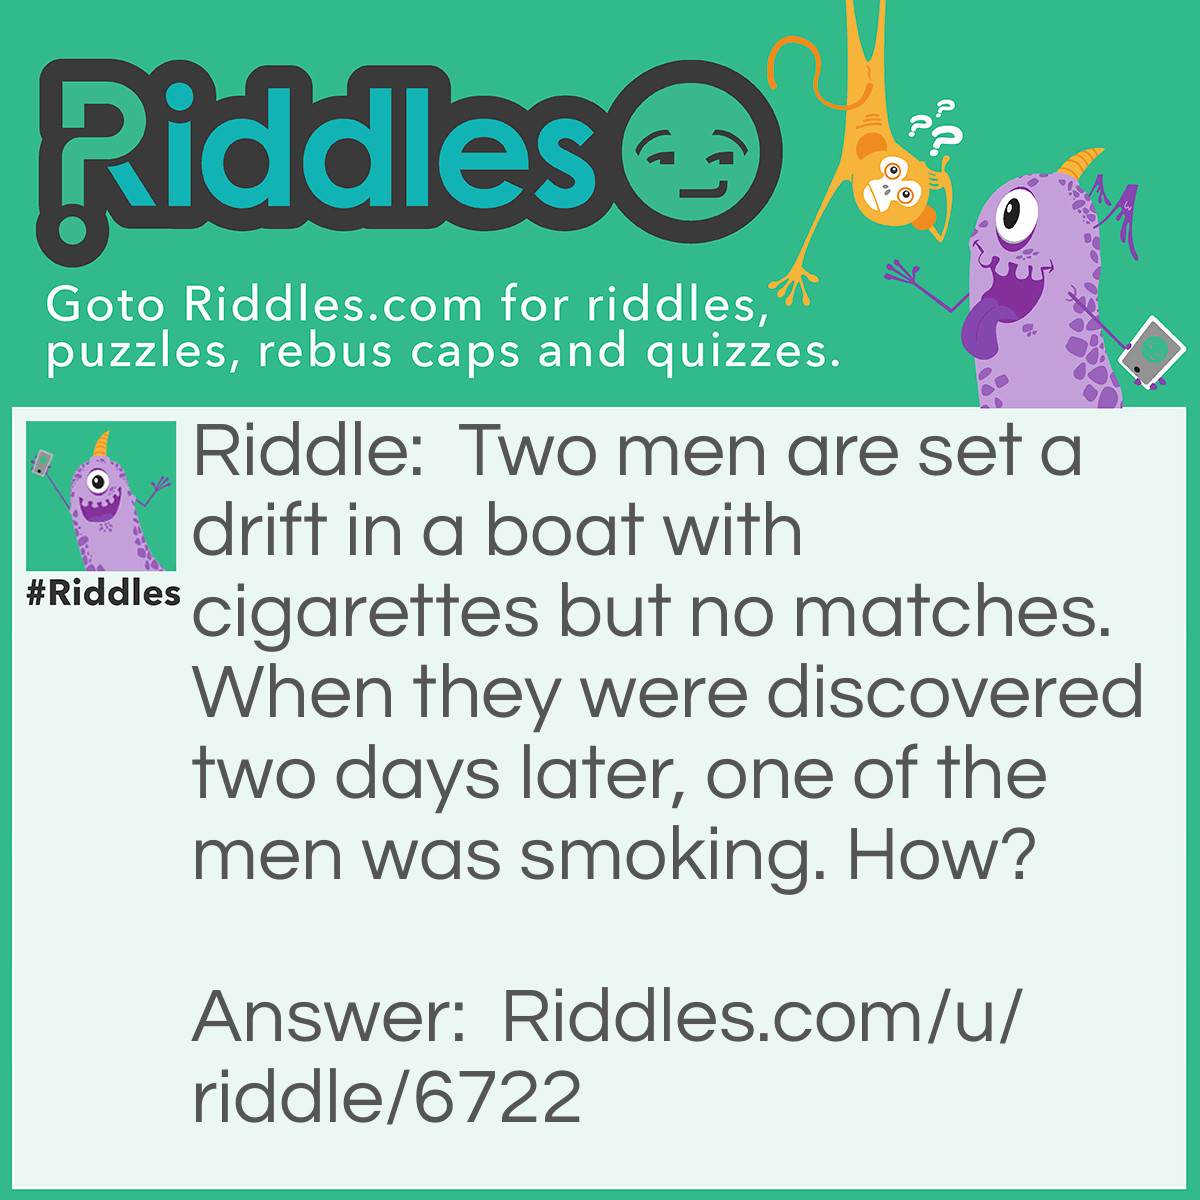 Riddle: Two men are set a drift in a boat with cigarettes but no matches. When they were discovered two days later, one of the men was smoking. How? Answer: One of the men threw his cigarette overboard and made the boat "A cigarette lighter'.